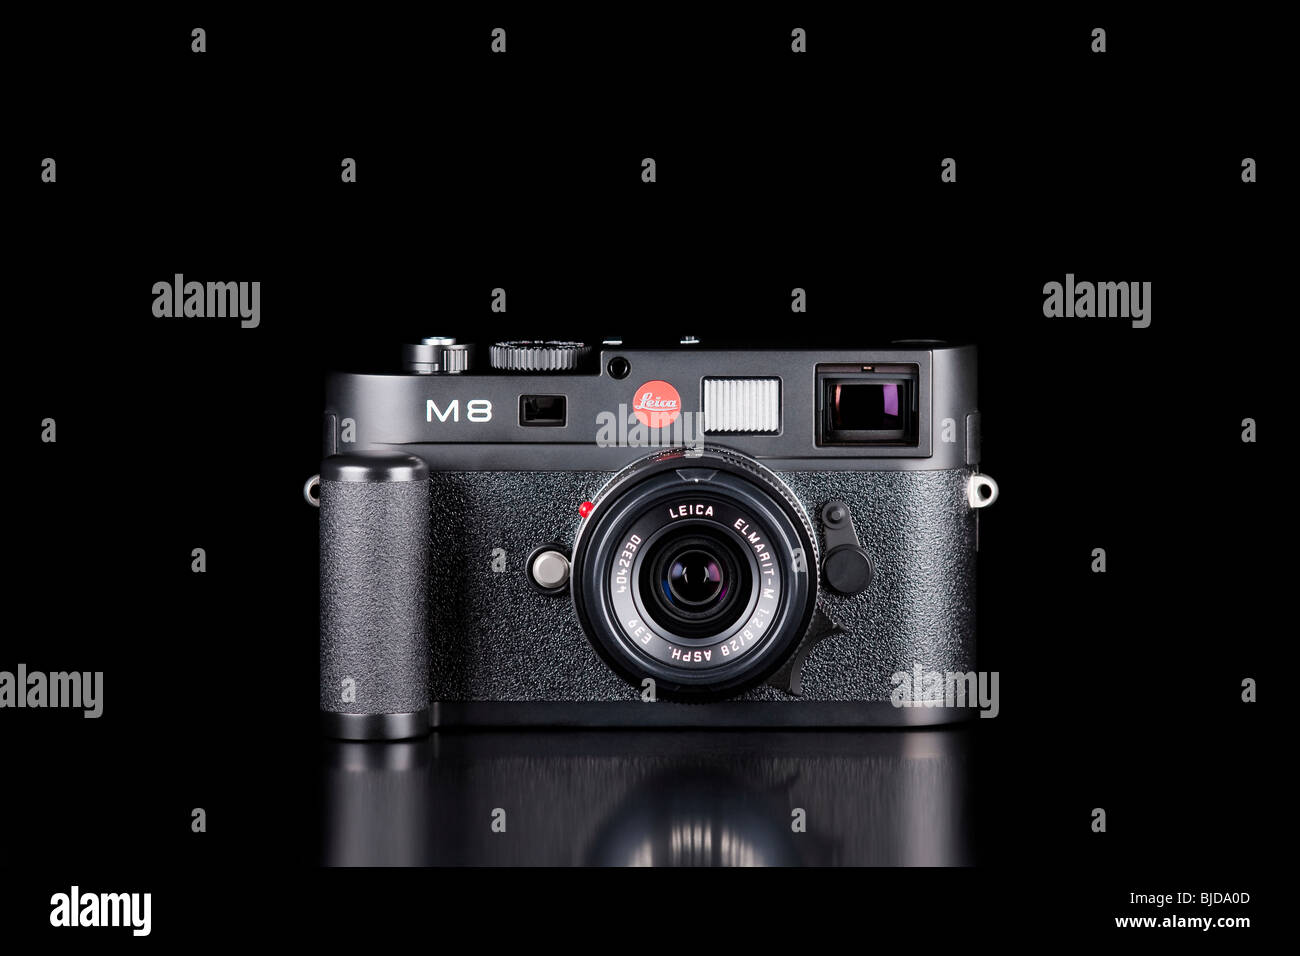 Black studio photograph of a Leica M8 digital rangefinder camera with hand grip and 28mm Elmarit lens Stock Photo